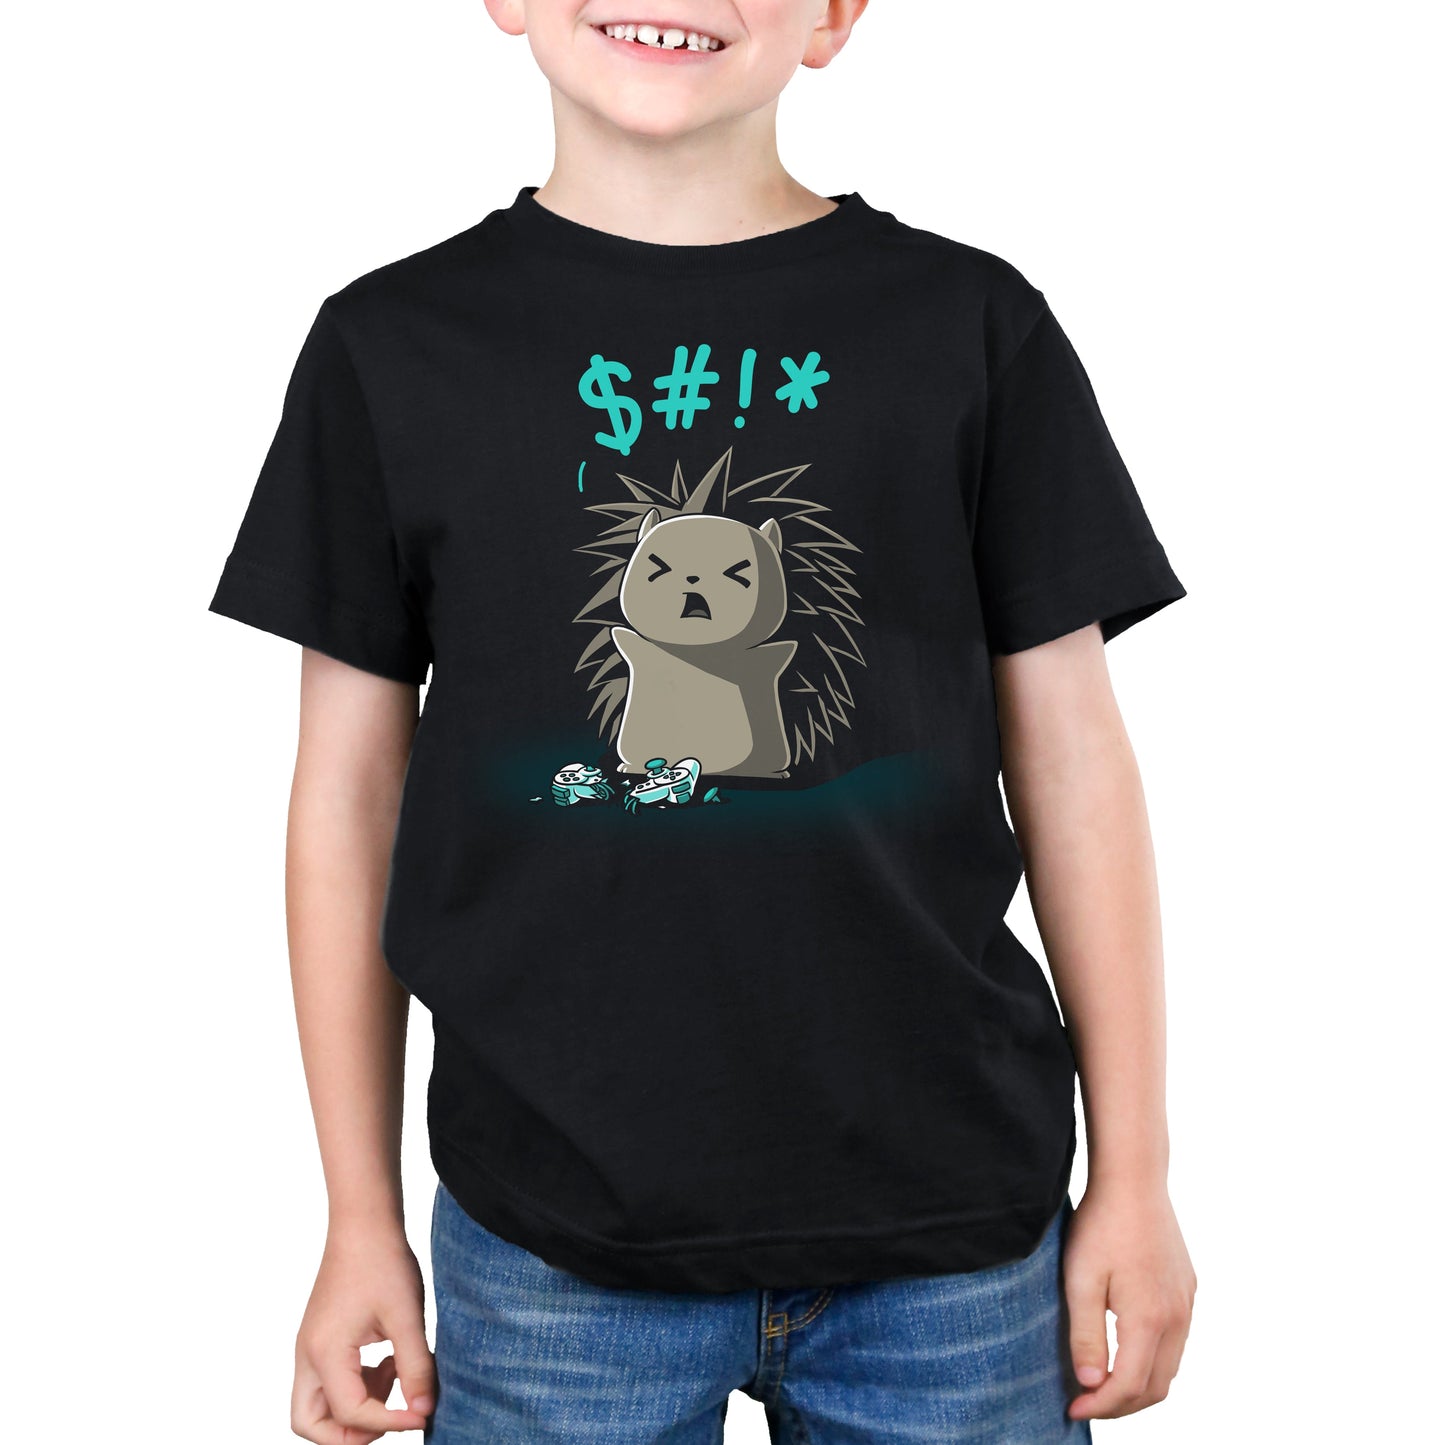 A child wearing a black Ragequit t-shirt from monsterdigital made from super soft ringspun cotton features an illustration of an angry cartoon hedgehog saying "$#!*". The child is smiling with their hands at their sides, standing near a broken object.